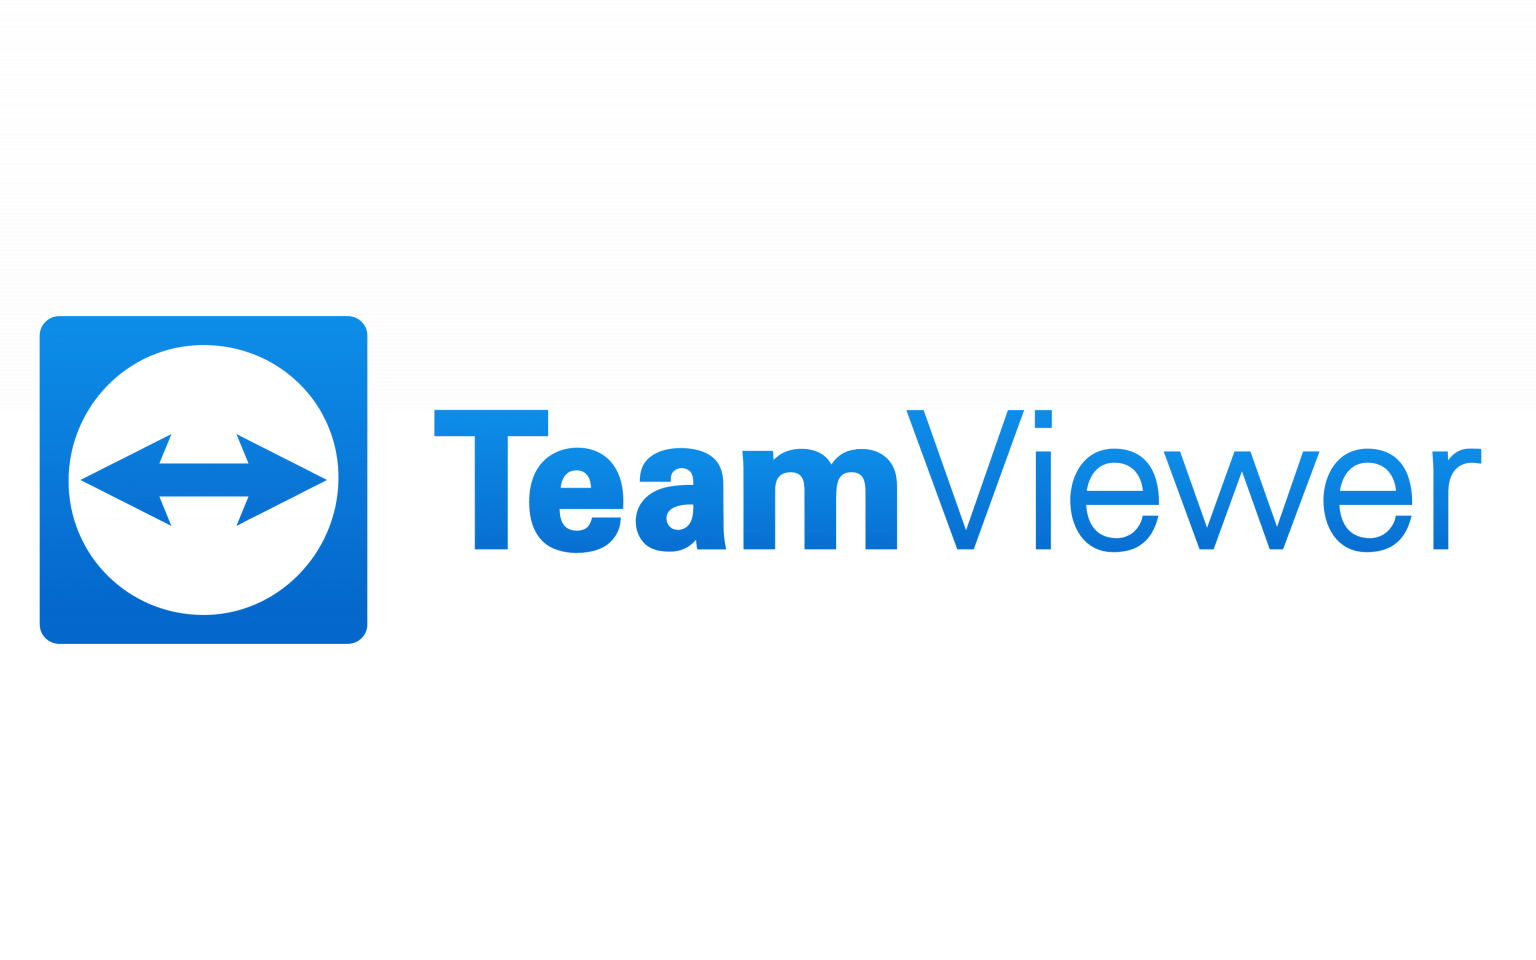 teamviewer-logo-and-symbol-meaning-history-png